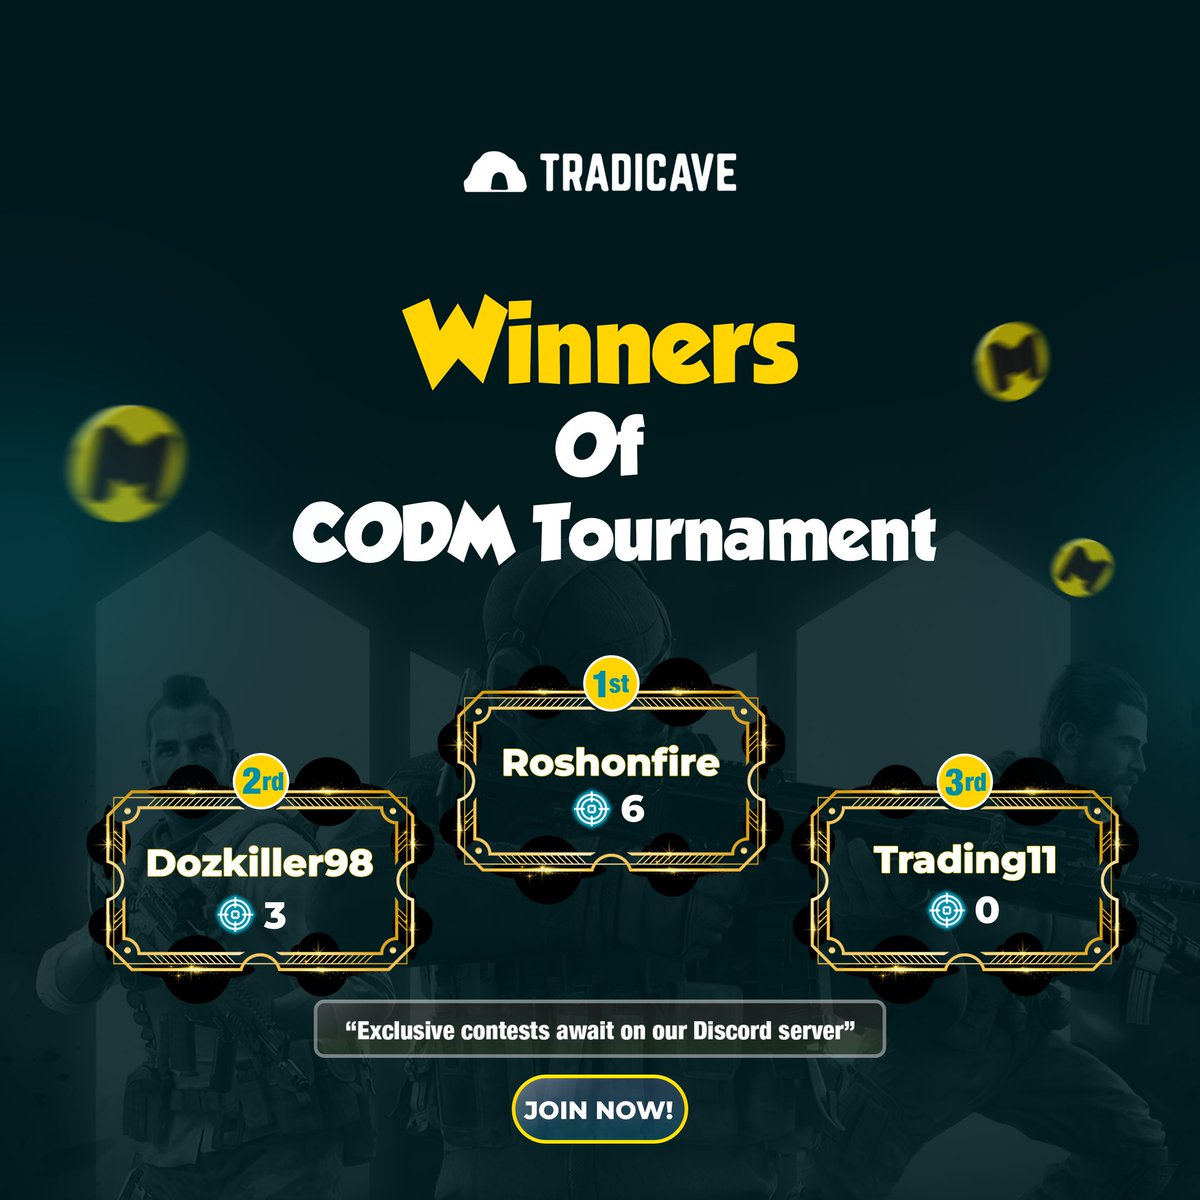 🏆Congratulations to our Discord CODM Competition Winners🎉 Want to be next? Join our Discord server and compete for exciting prizes! 🎮💡 Discord Link: discord.com/invite/tradica… Follow @Tradicave For more visit: tradicave.com #tradicave #propfirm #discordgames